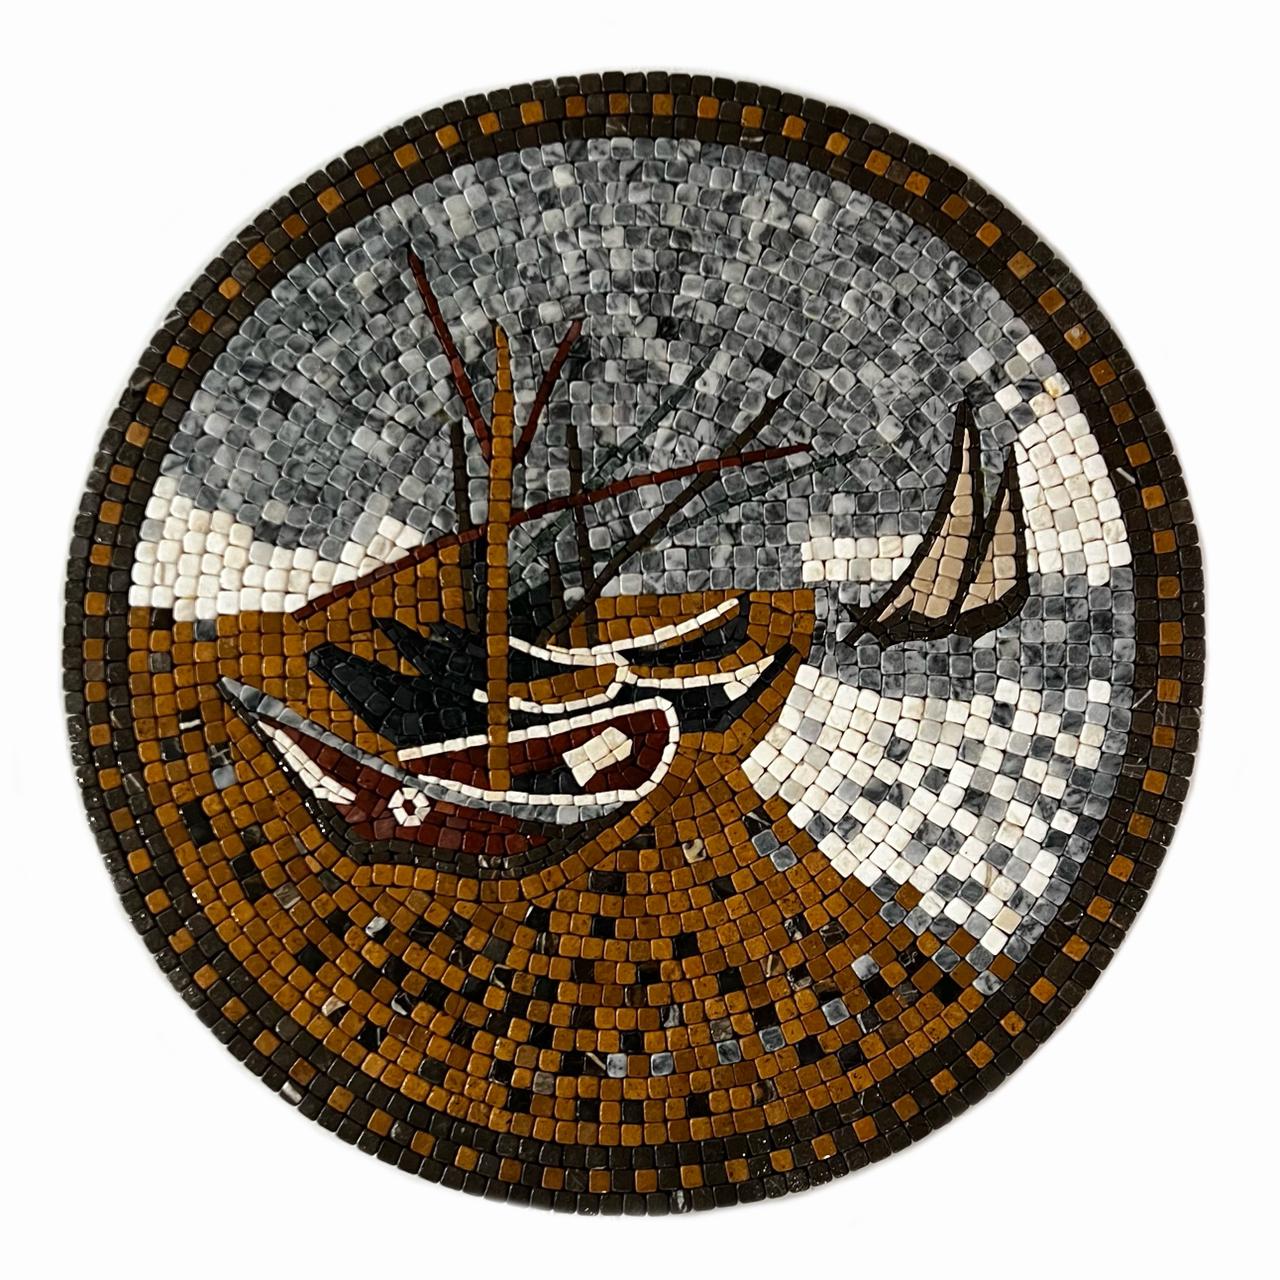 BOAT ON A DEATH RIVER - Mosaic By Qureshi's